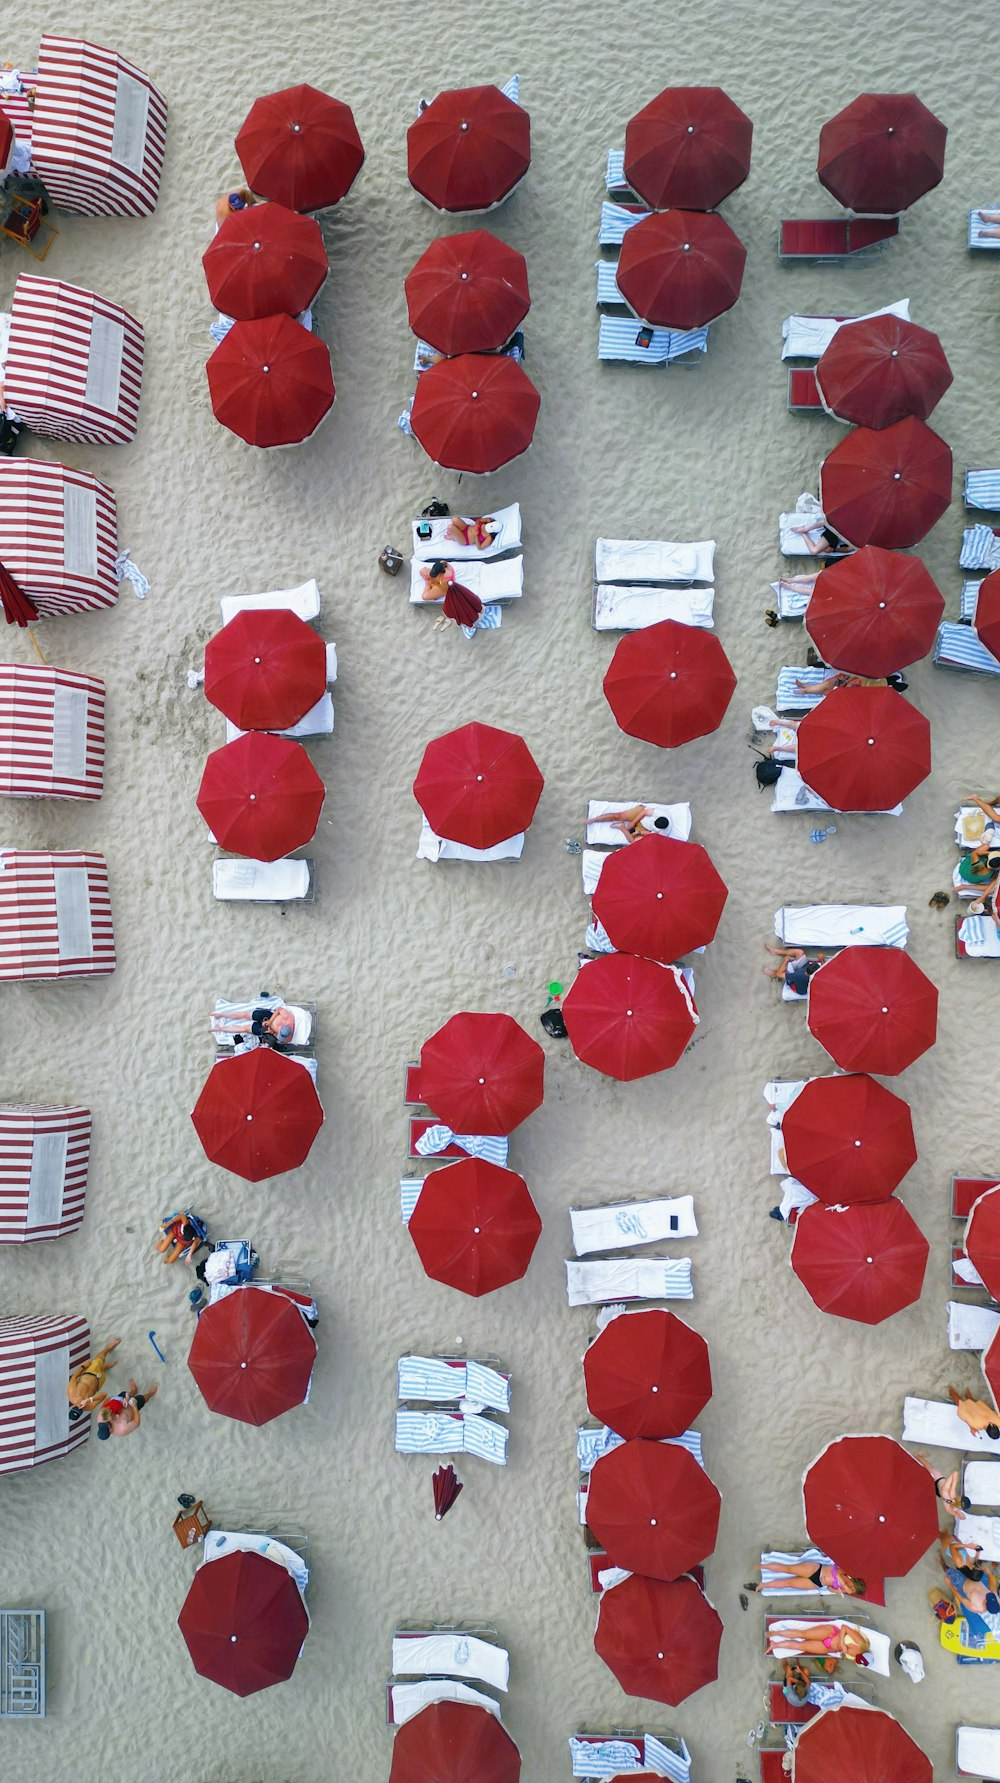 a group of red umbrellas sitting on top of a sandy beach